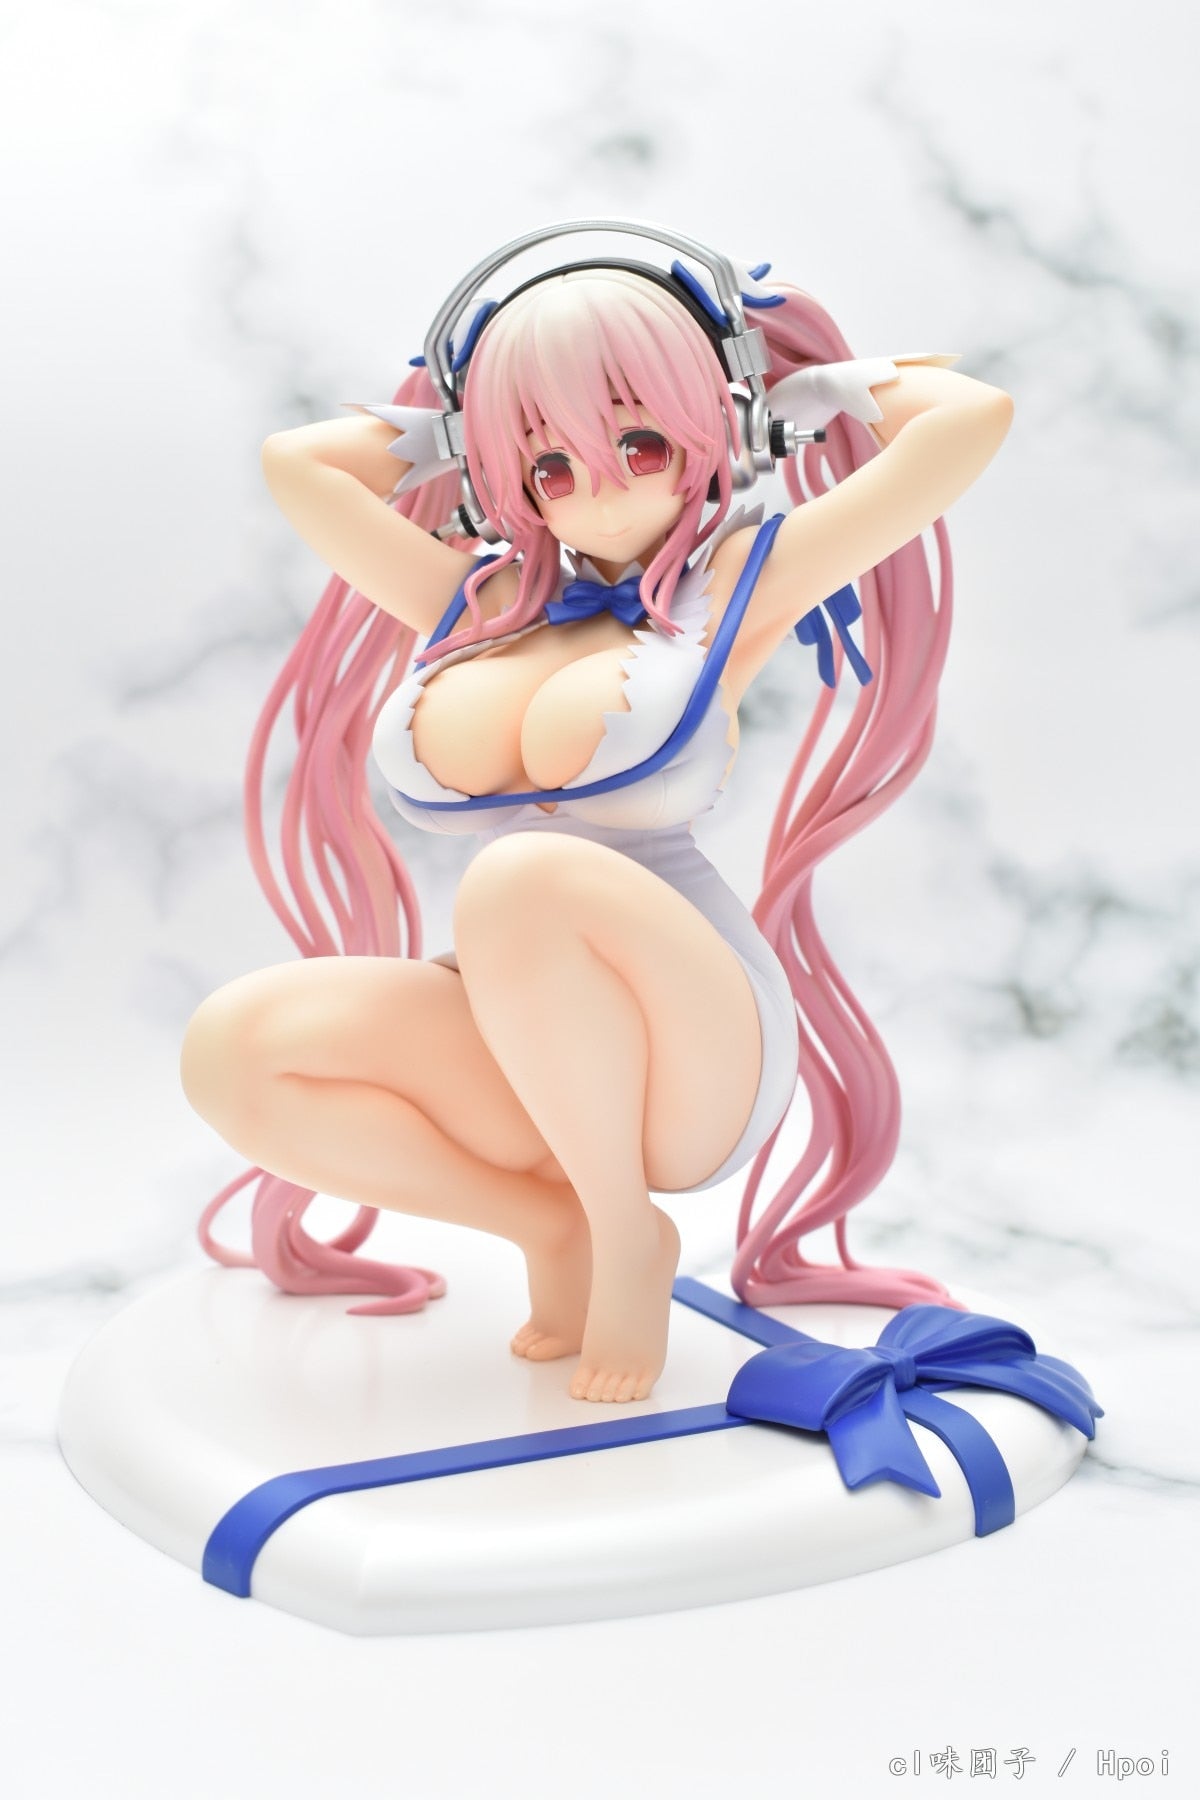 23CM Anime Sexy Cute Figure Anime SUPERSONICO Cospaly Hestia Dungeon Squat Pose Model Dolls Toy Gift BoxCollect PVC Material